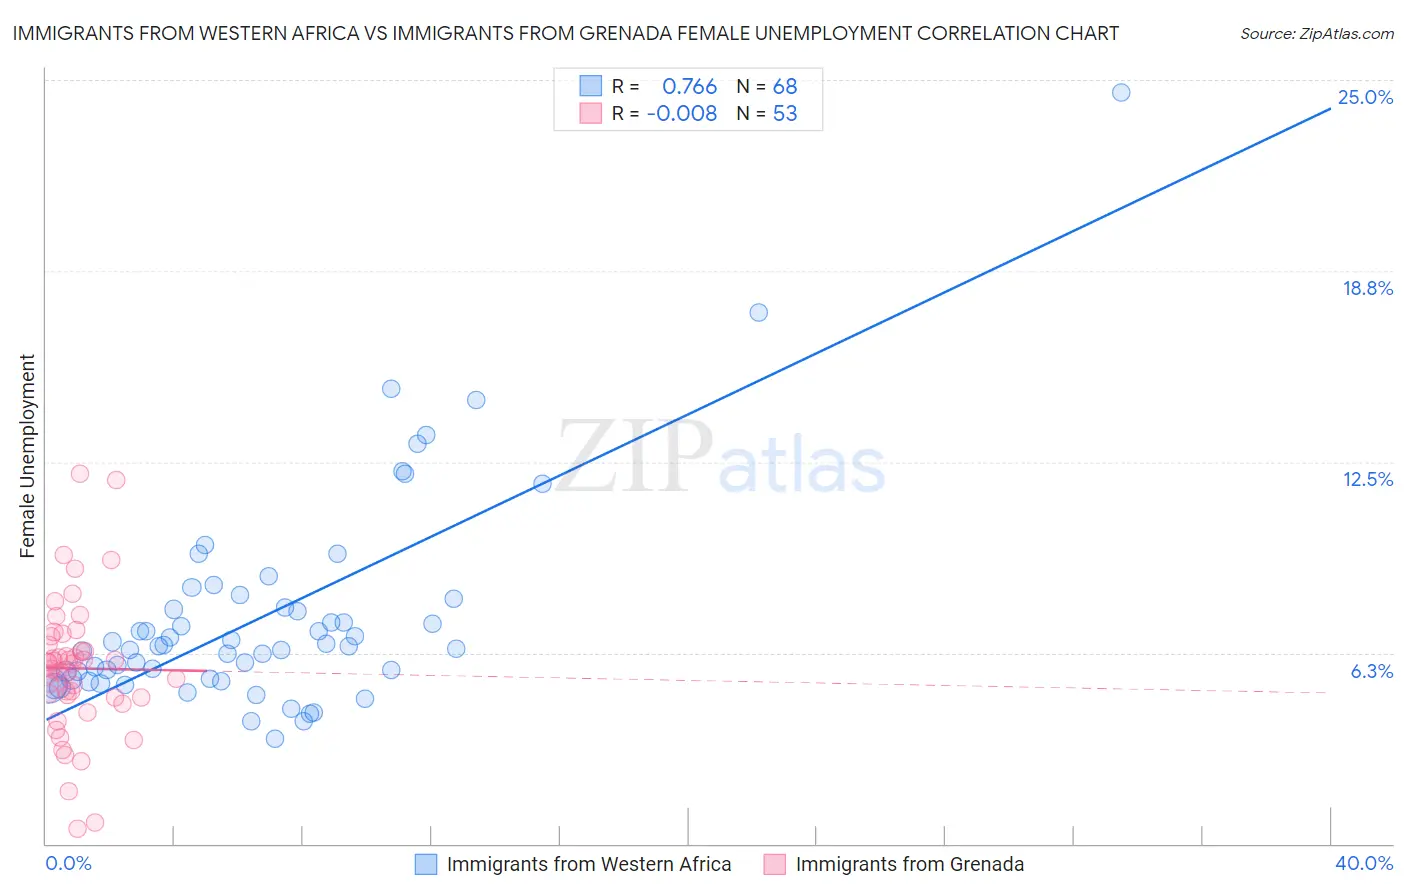 Immigrants from Western Africa vs Immigrants from Grenada Female Unemployment